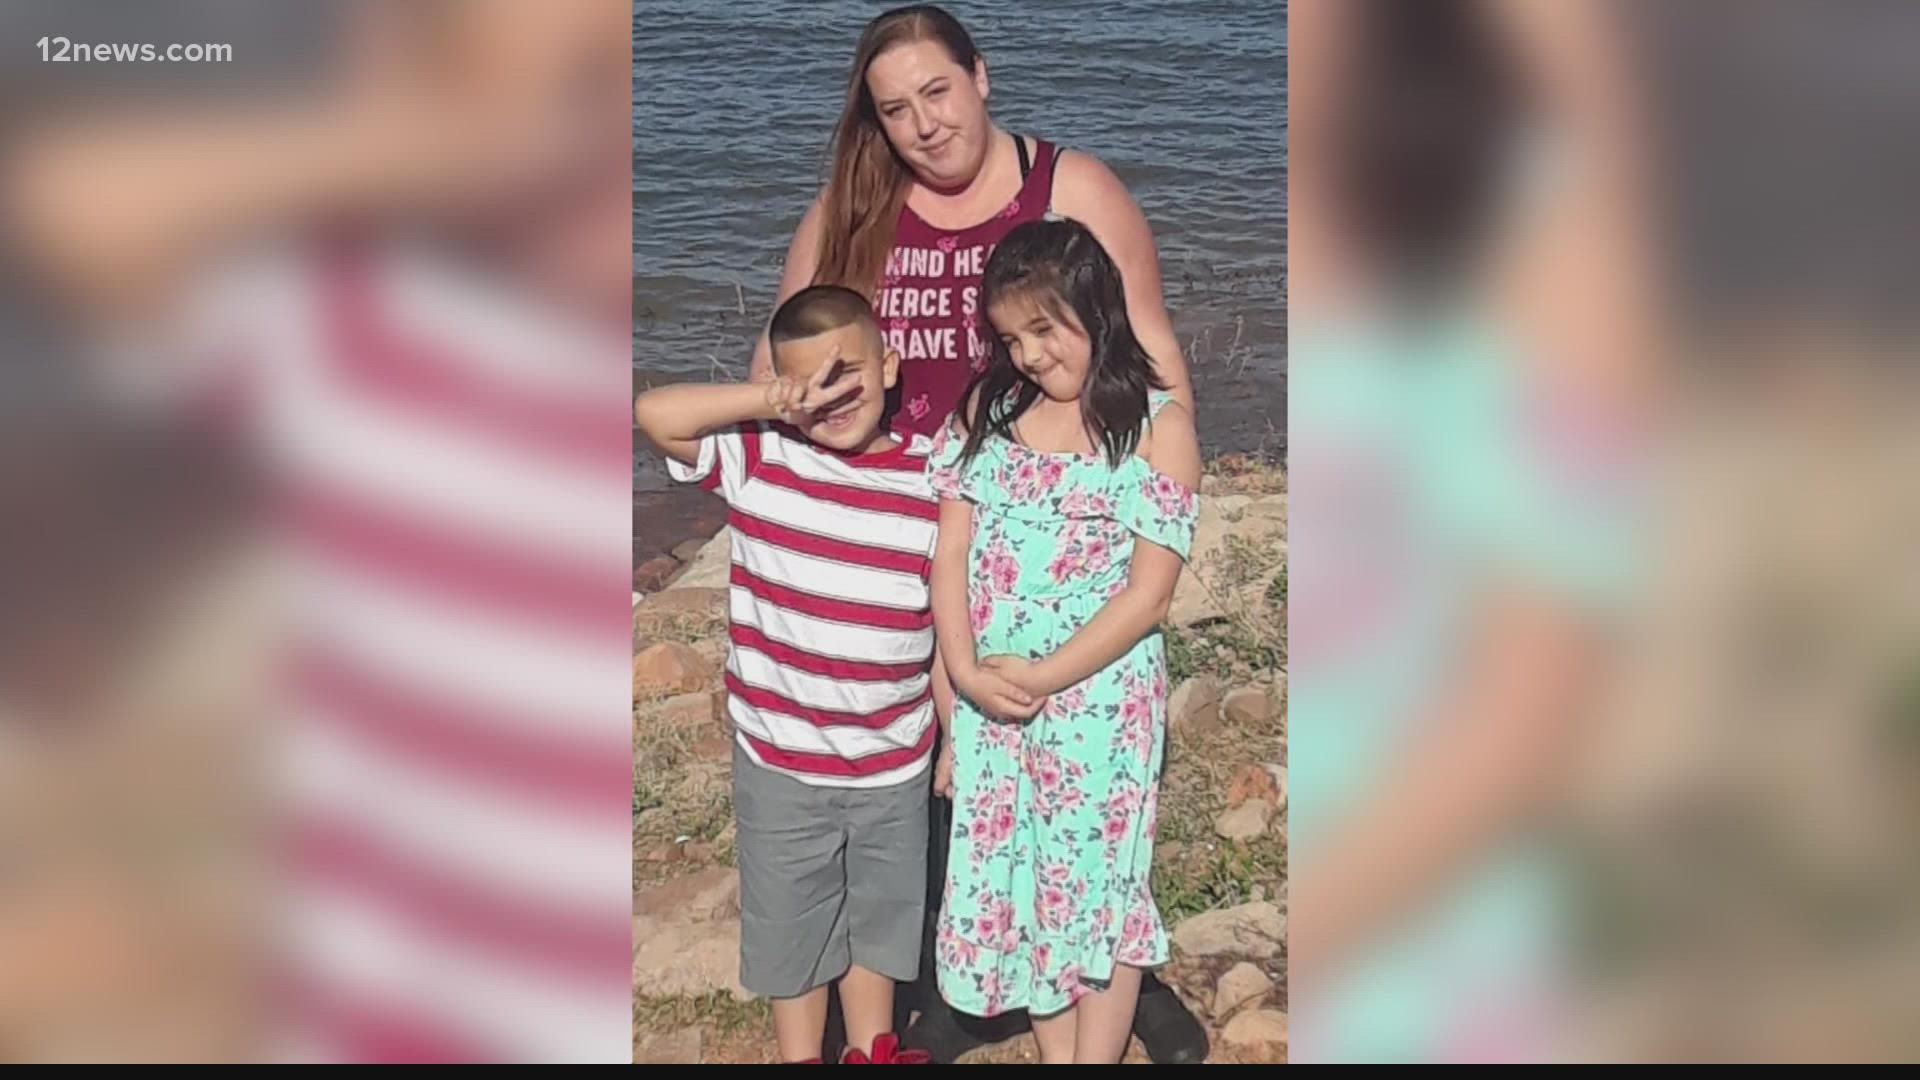 The family of 11-year-old Alysa Marin is devastated to hear that she will not recover after she, her mom, her brothers and her cousin were hit by a car on Friday.